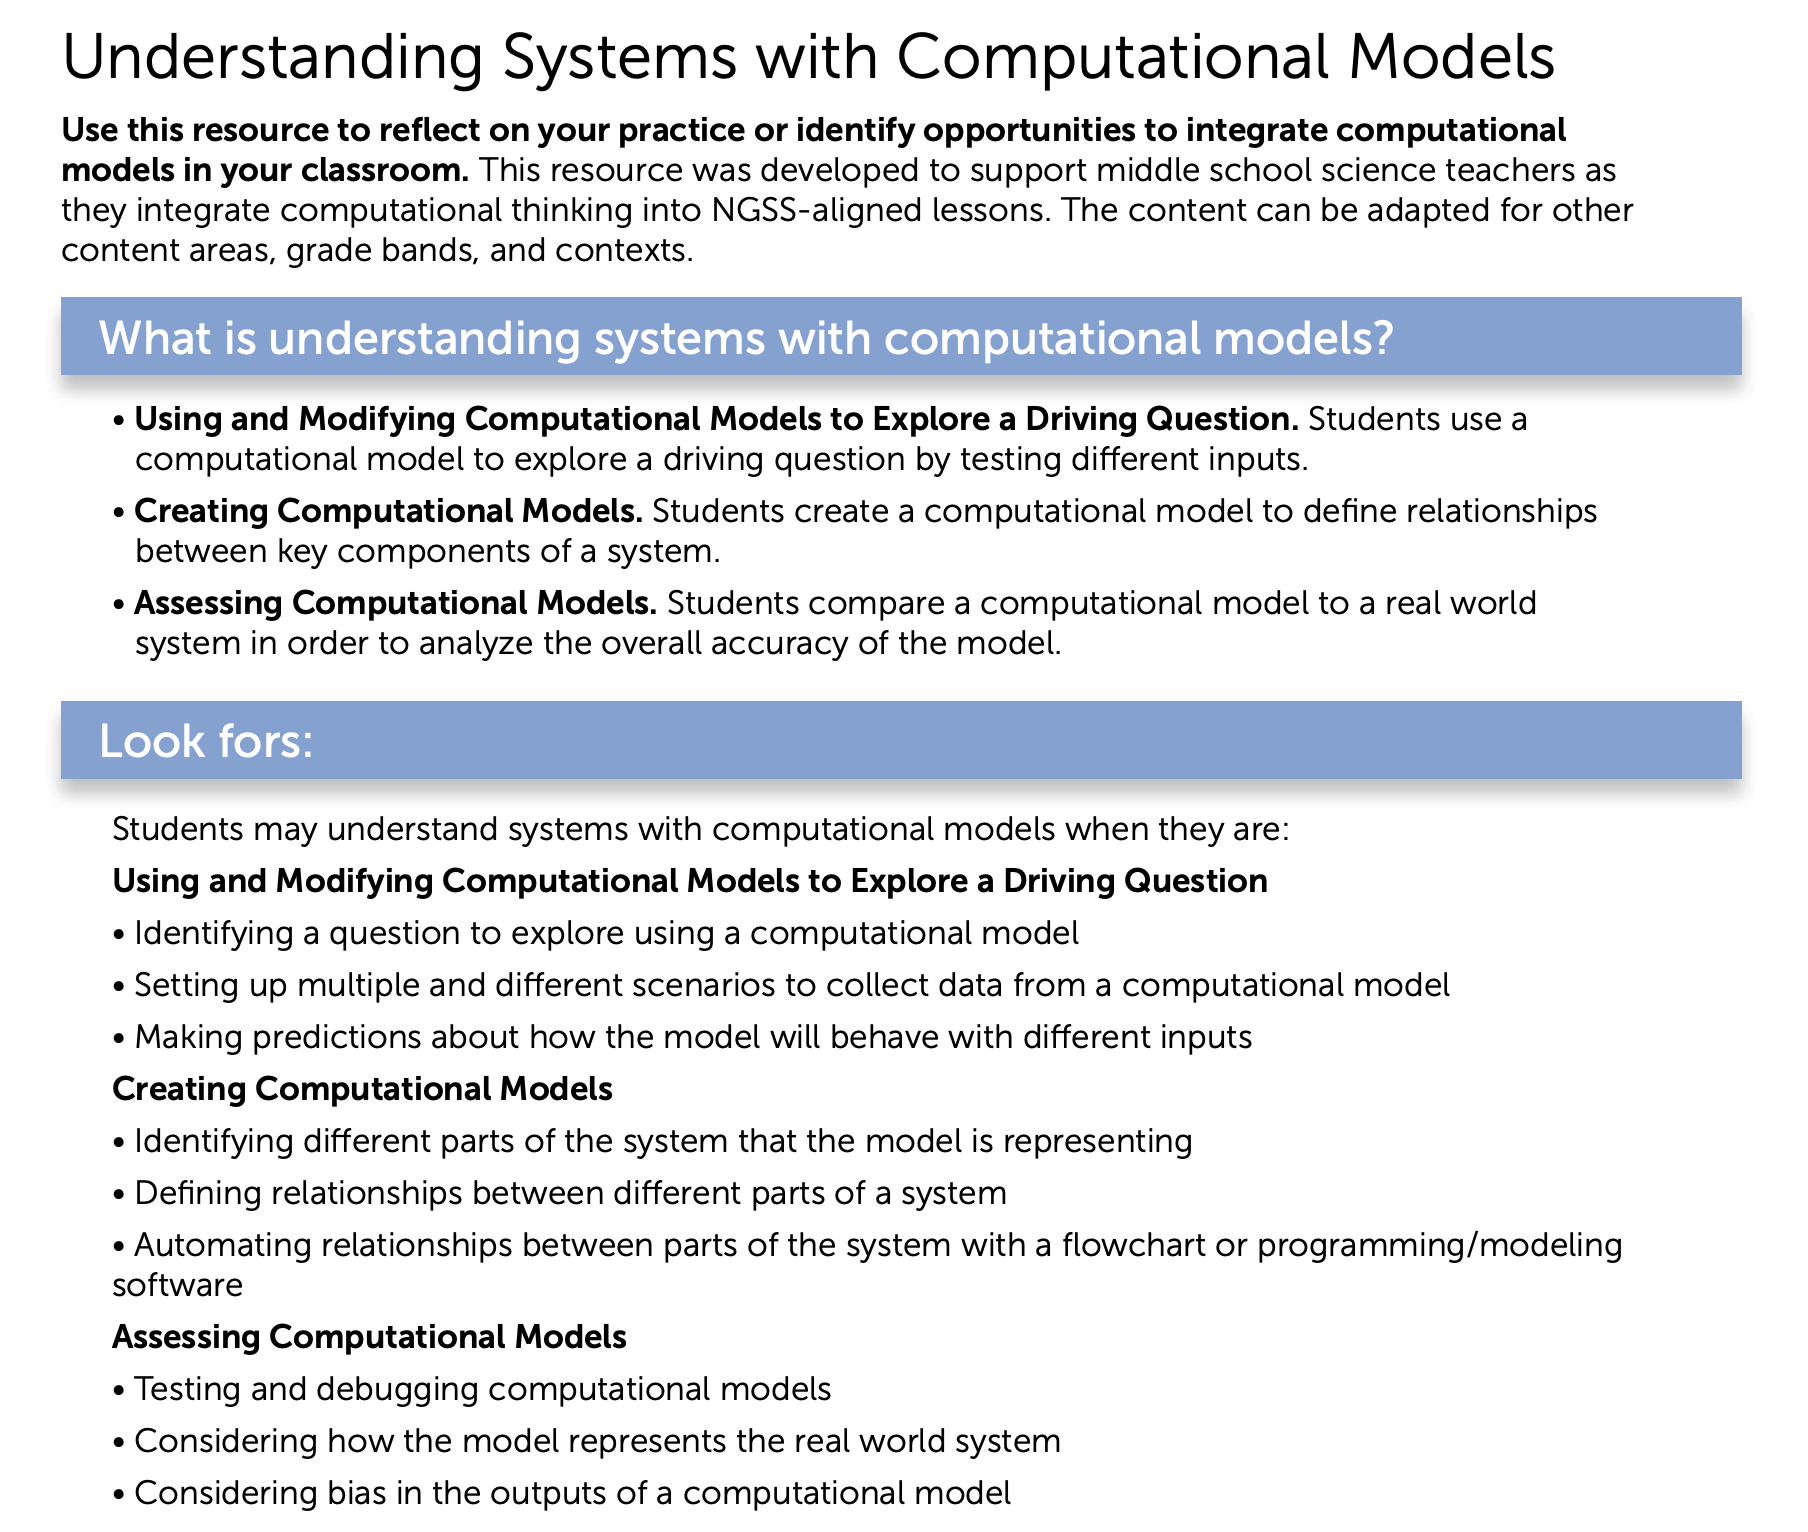 Screenshot of the linked Understanding Systems with Computational Models resource.